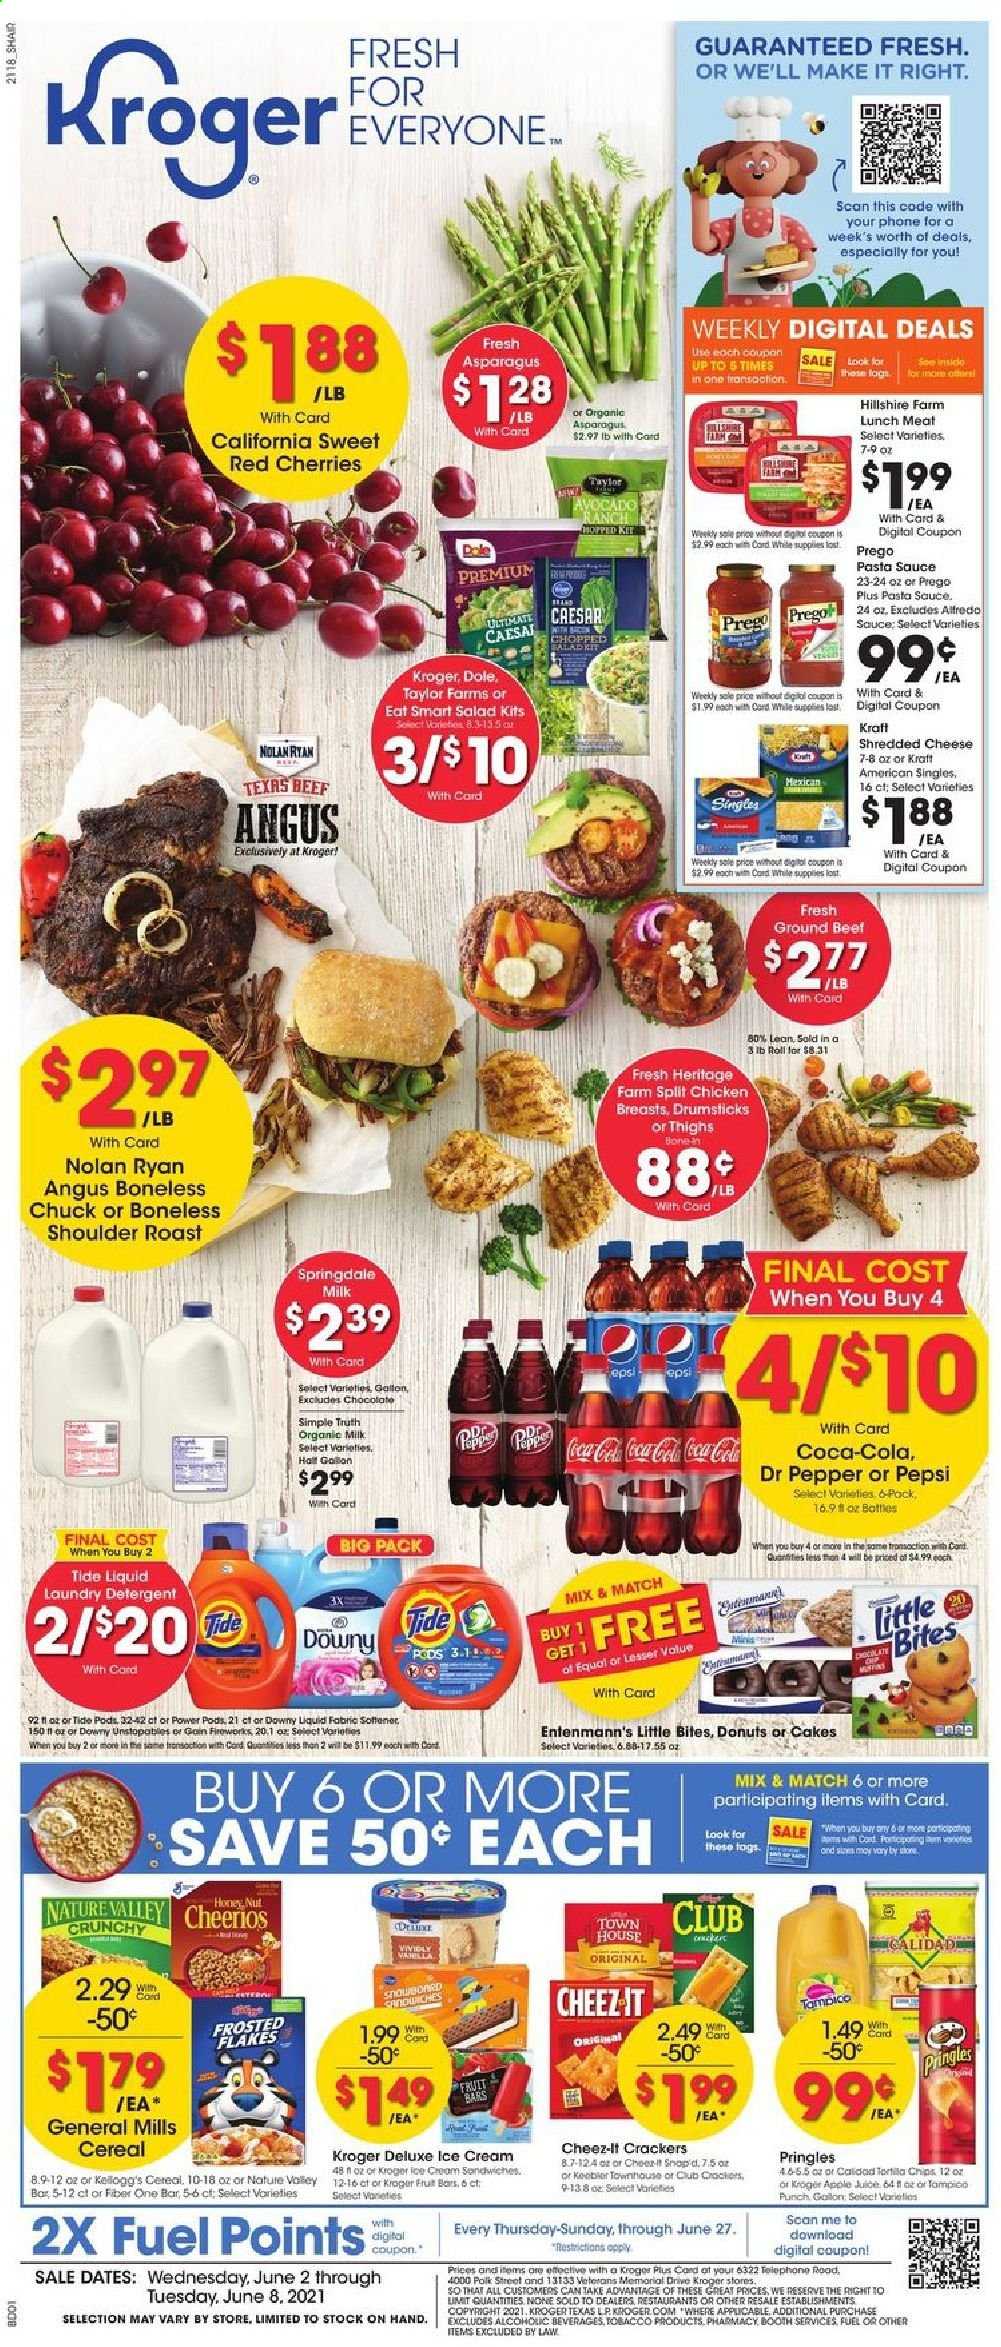 thumbnail - Kroger Flyer - 06/02/2021 - 06/08/2021 - Sales products - cake, donut, Entenmann's, asparagus, salad, Dole, avocado, cod, pasta sauce, Alfredo sauce, Kraft®, Hillshire Farm, lunch meat, shredded cheese, milk, ice cream, crackers, Kellogg's, Little Bites, Pringles, chips, Cheez-It, cereals, Cheerios, Frosted Flakes, Nature Valley, Fiber One, apple juice, Coca-Cola, Pepsi, juice, Dr. Pepper, punch, chicken breasts, detergent, Tide, Unstopables, laundry detergent, Downy Laundry. Page 1.